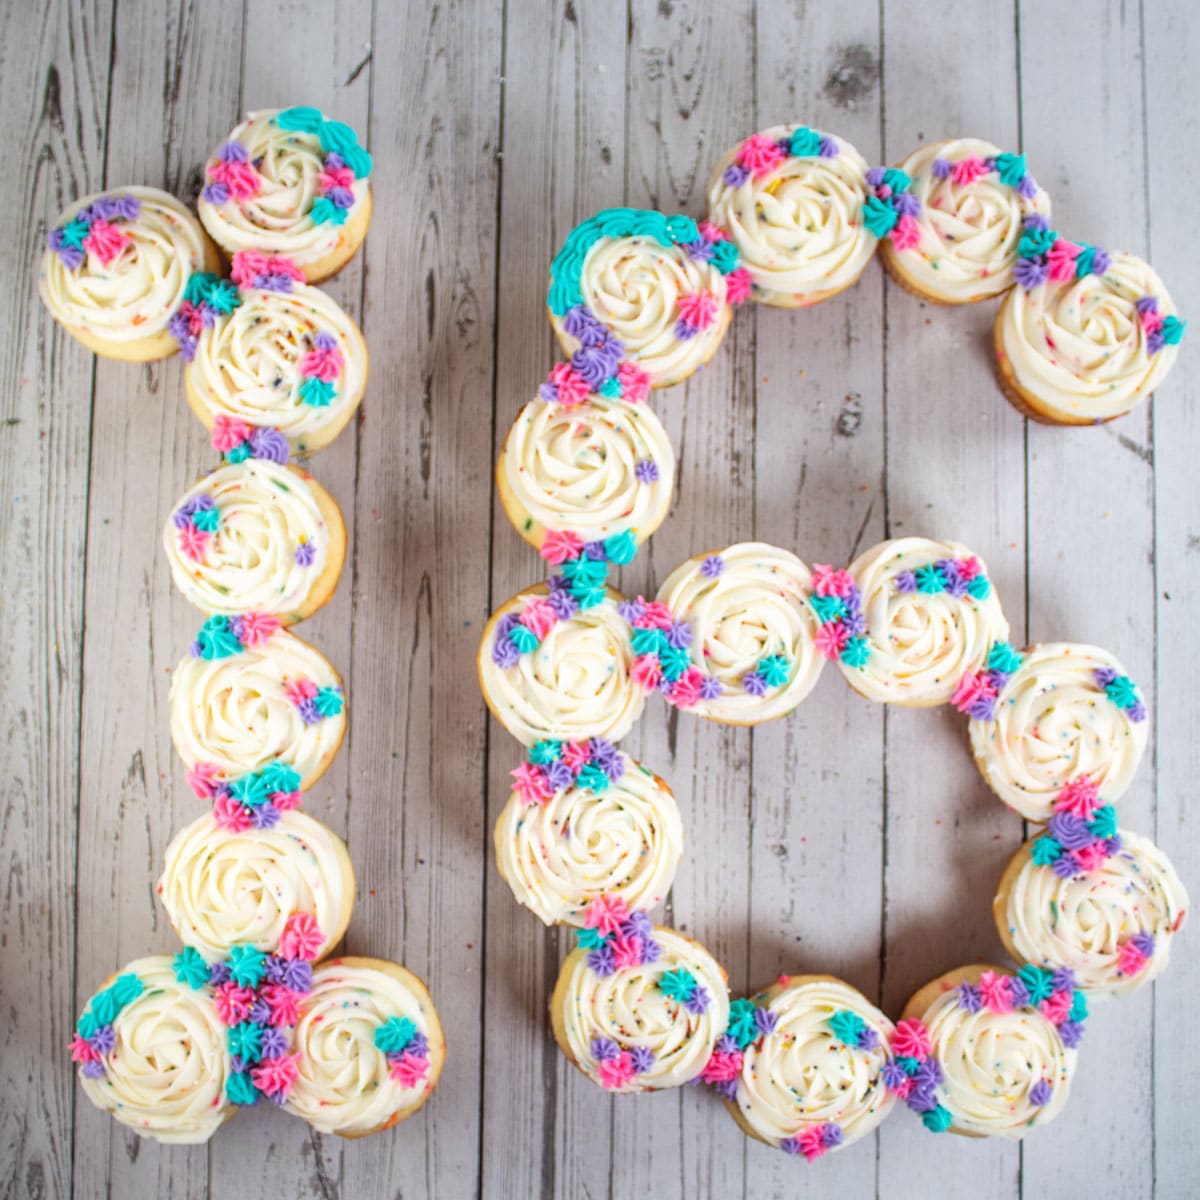 How To Make A Number Cupcake Cake: Easy, Complete Tutorial